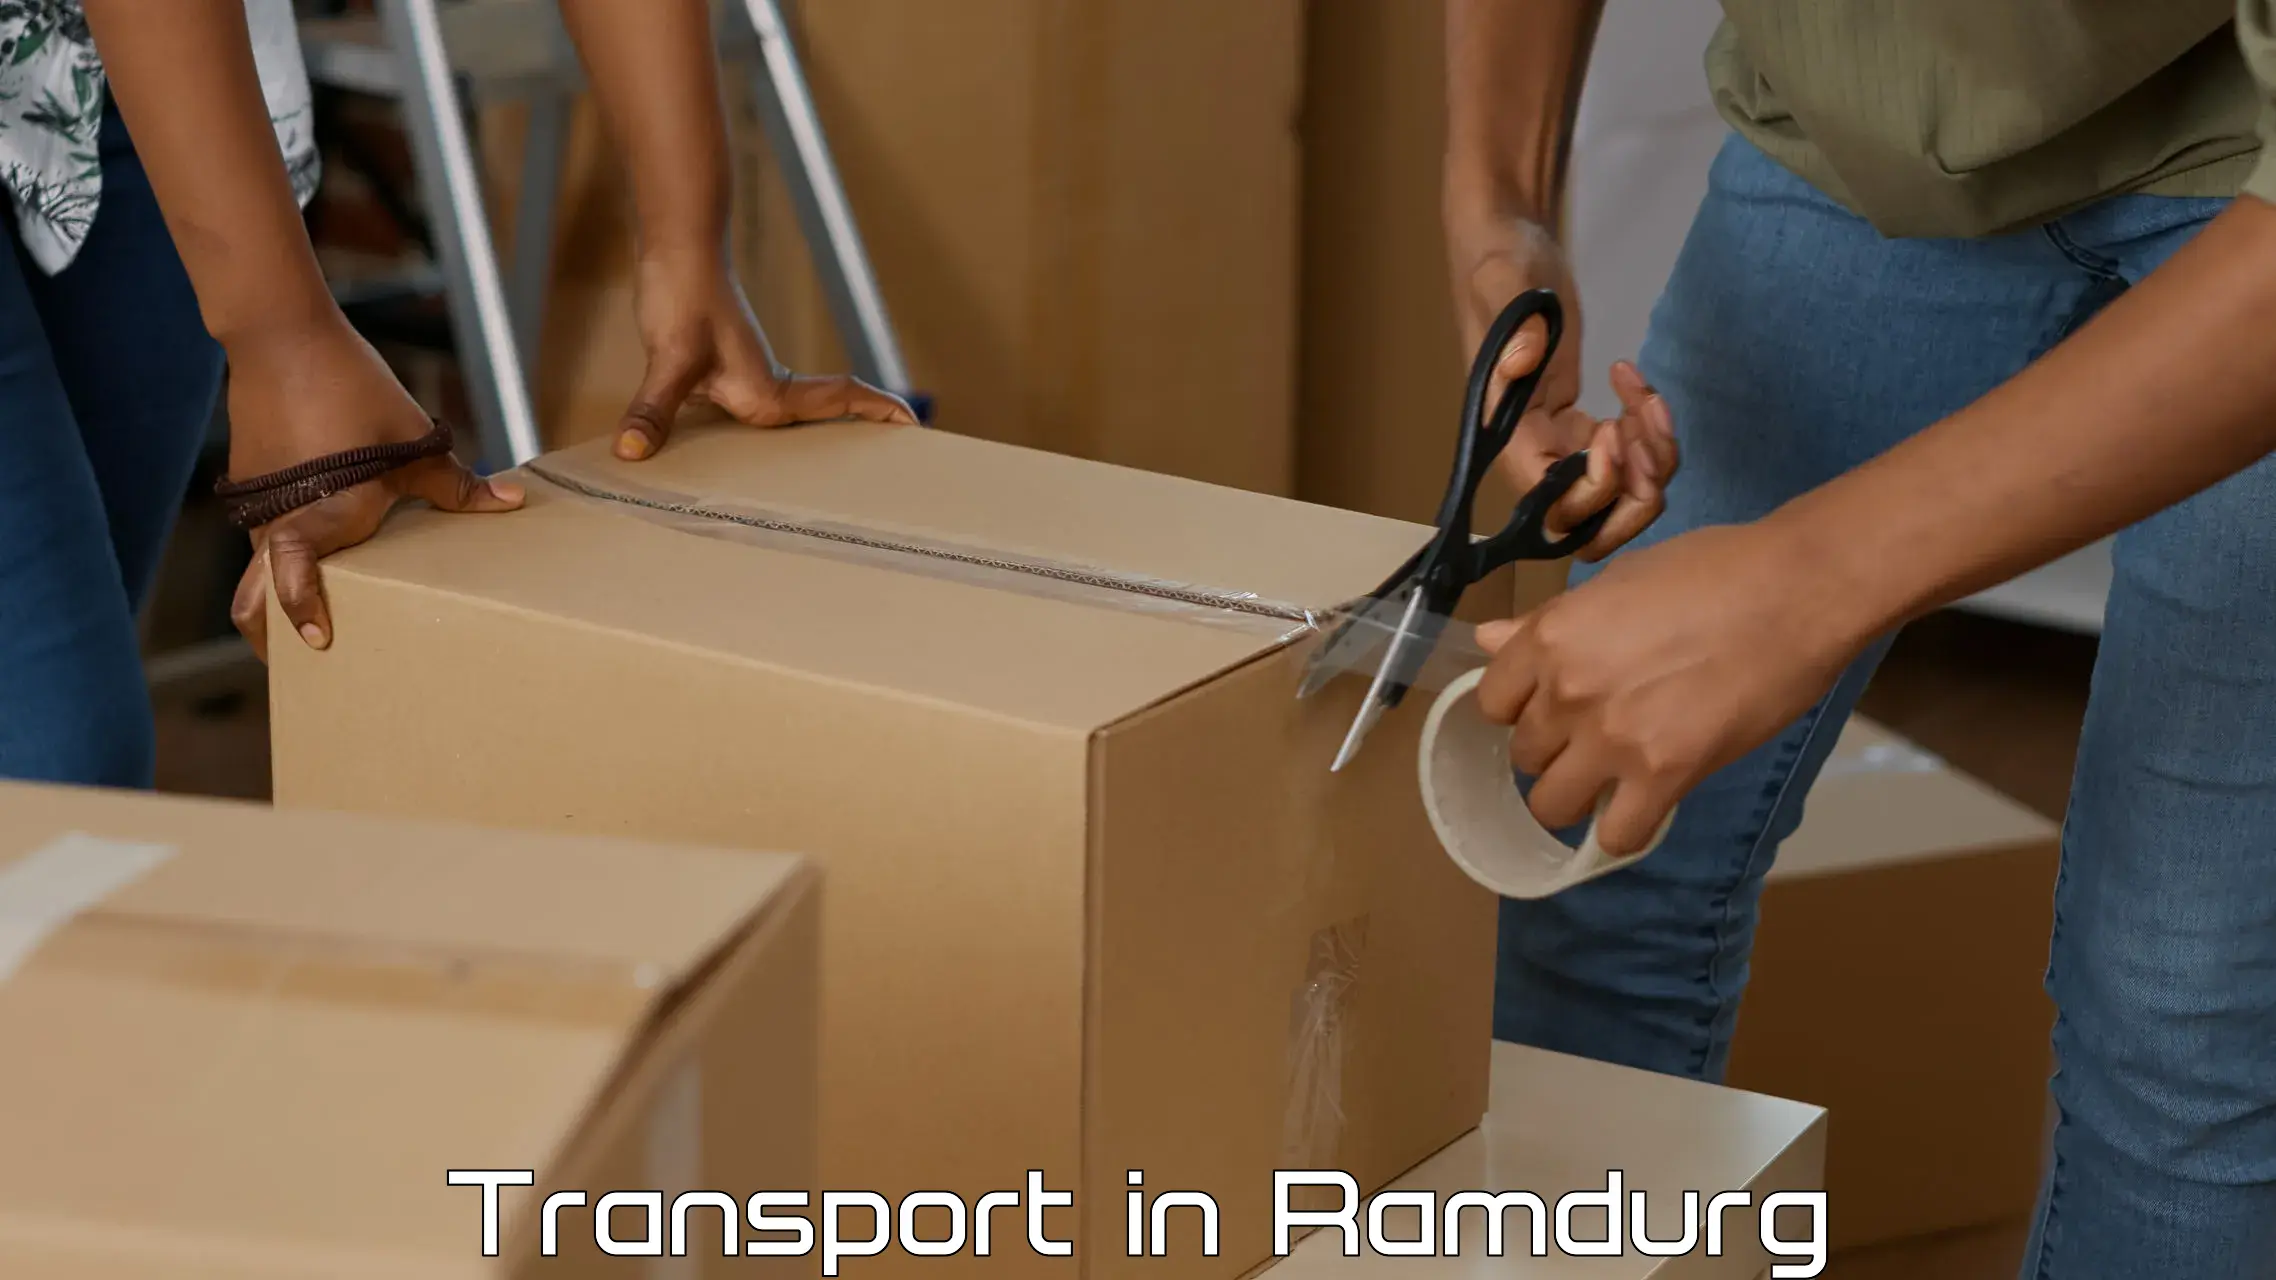 Container transportation services in Ramdurg